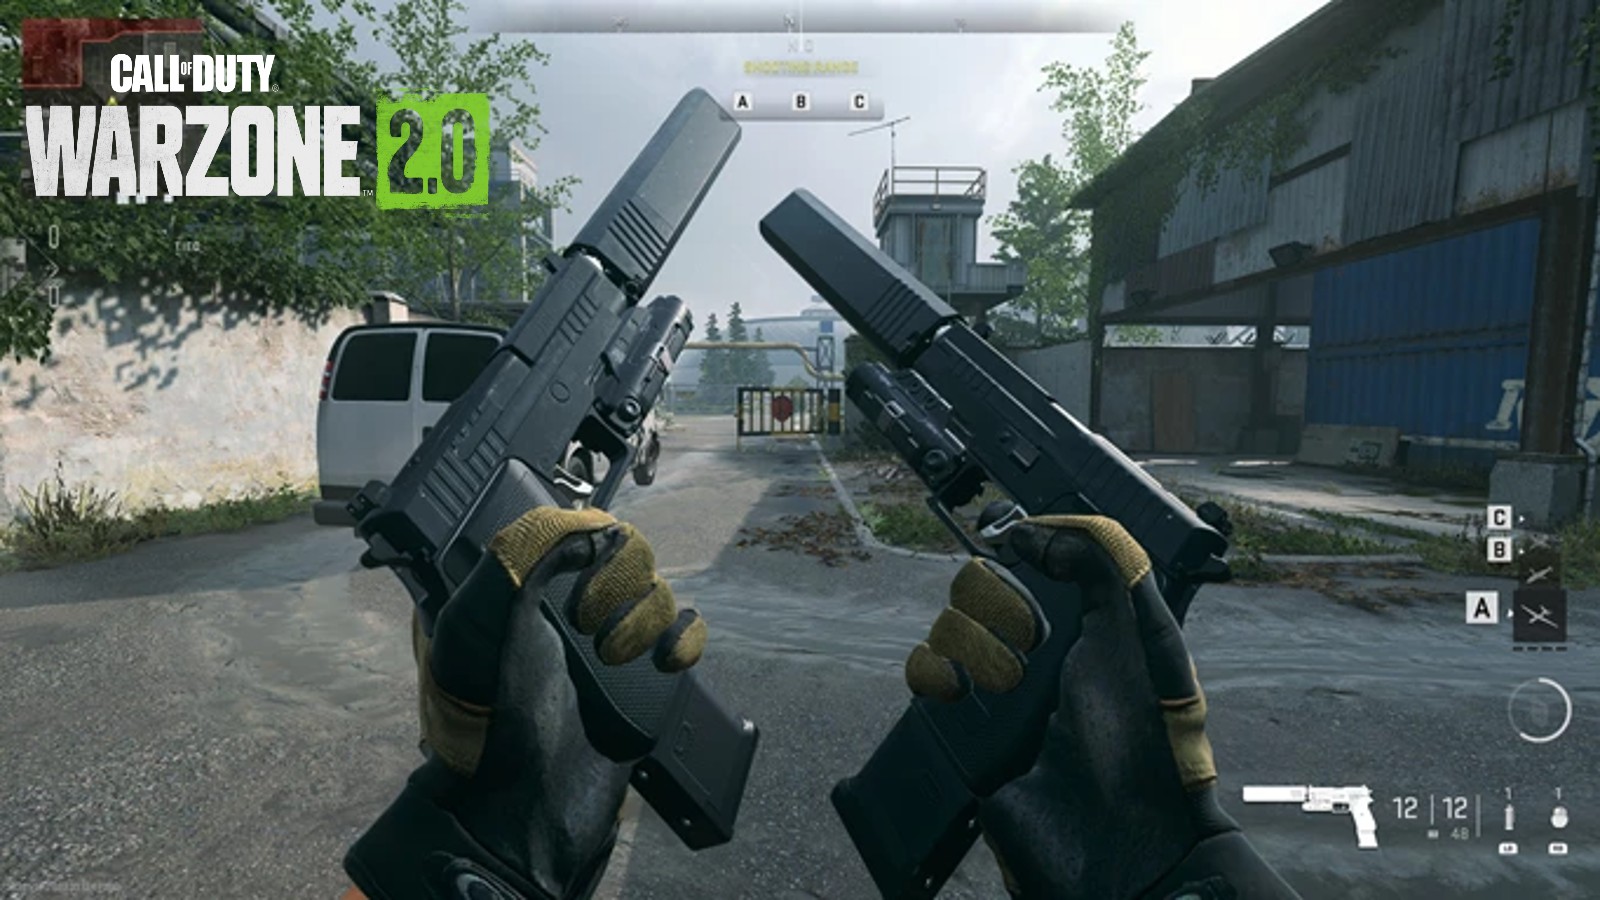 Counter-Strike 2 players realize aiming in CS:GO was broken the whole time  - Dexerto